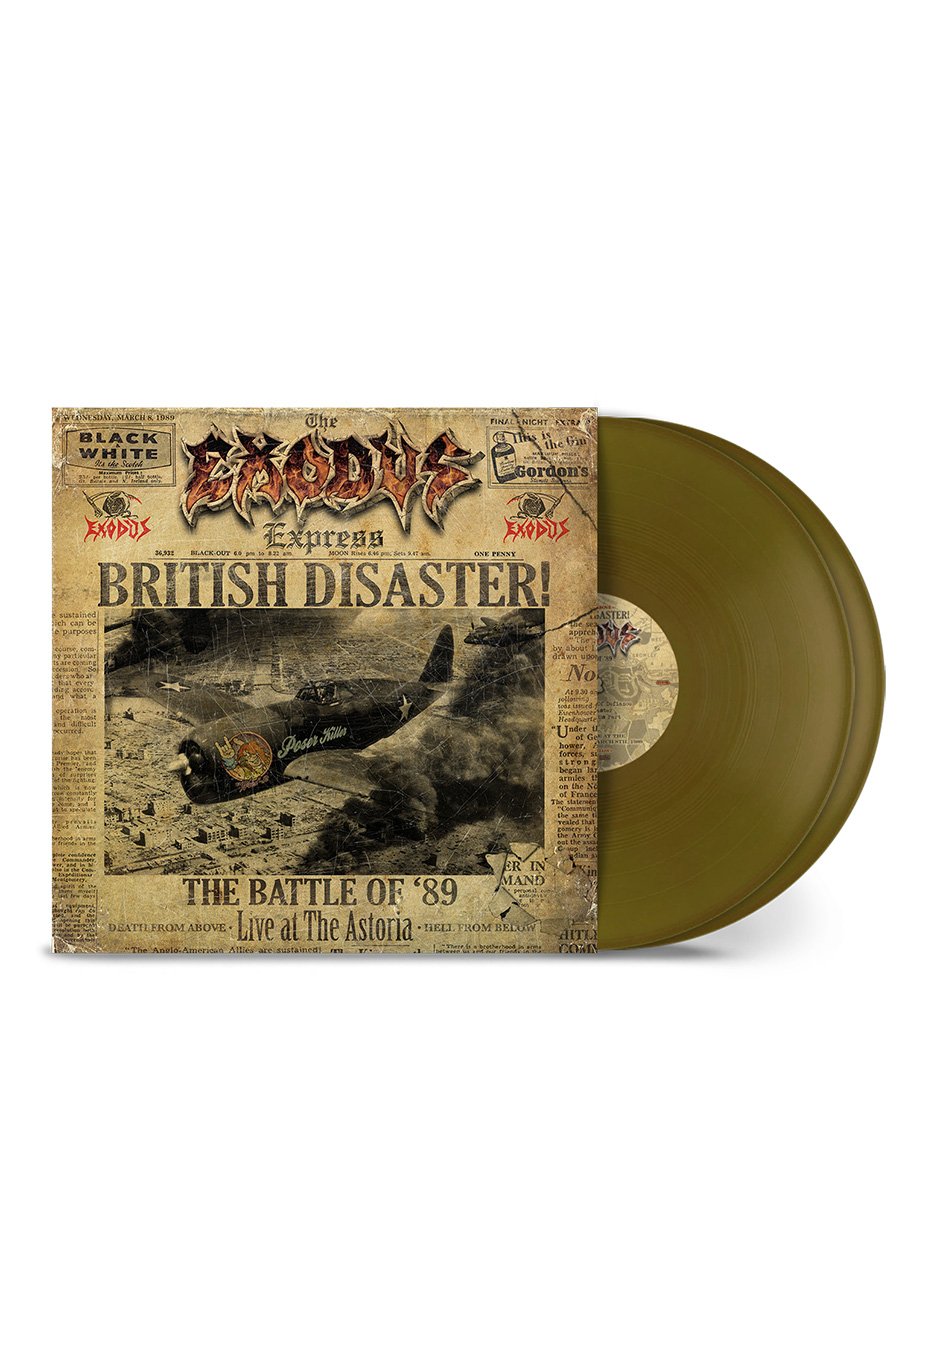 Exodus - British Disaster: The Battle Of '89 (Live At The Astoria) Ltd. Gold - Colored 2 Vinyl